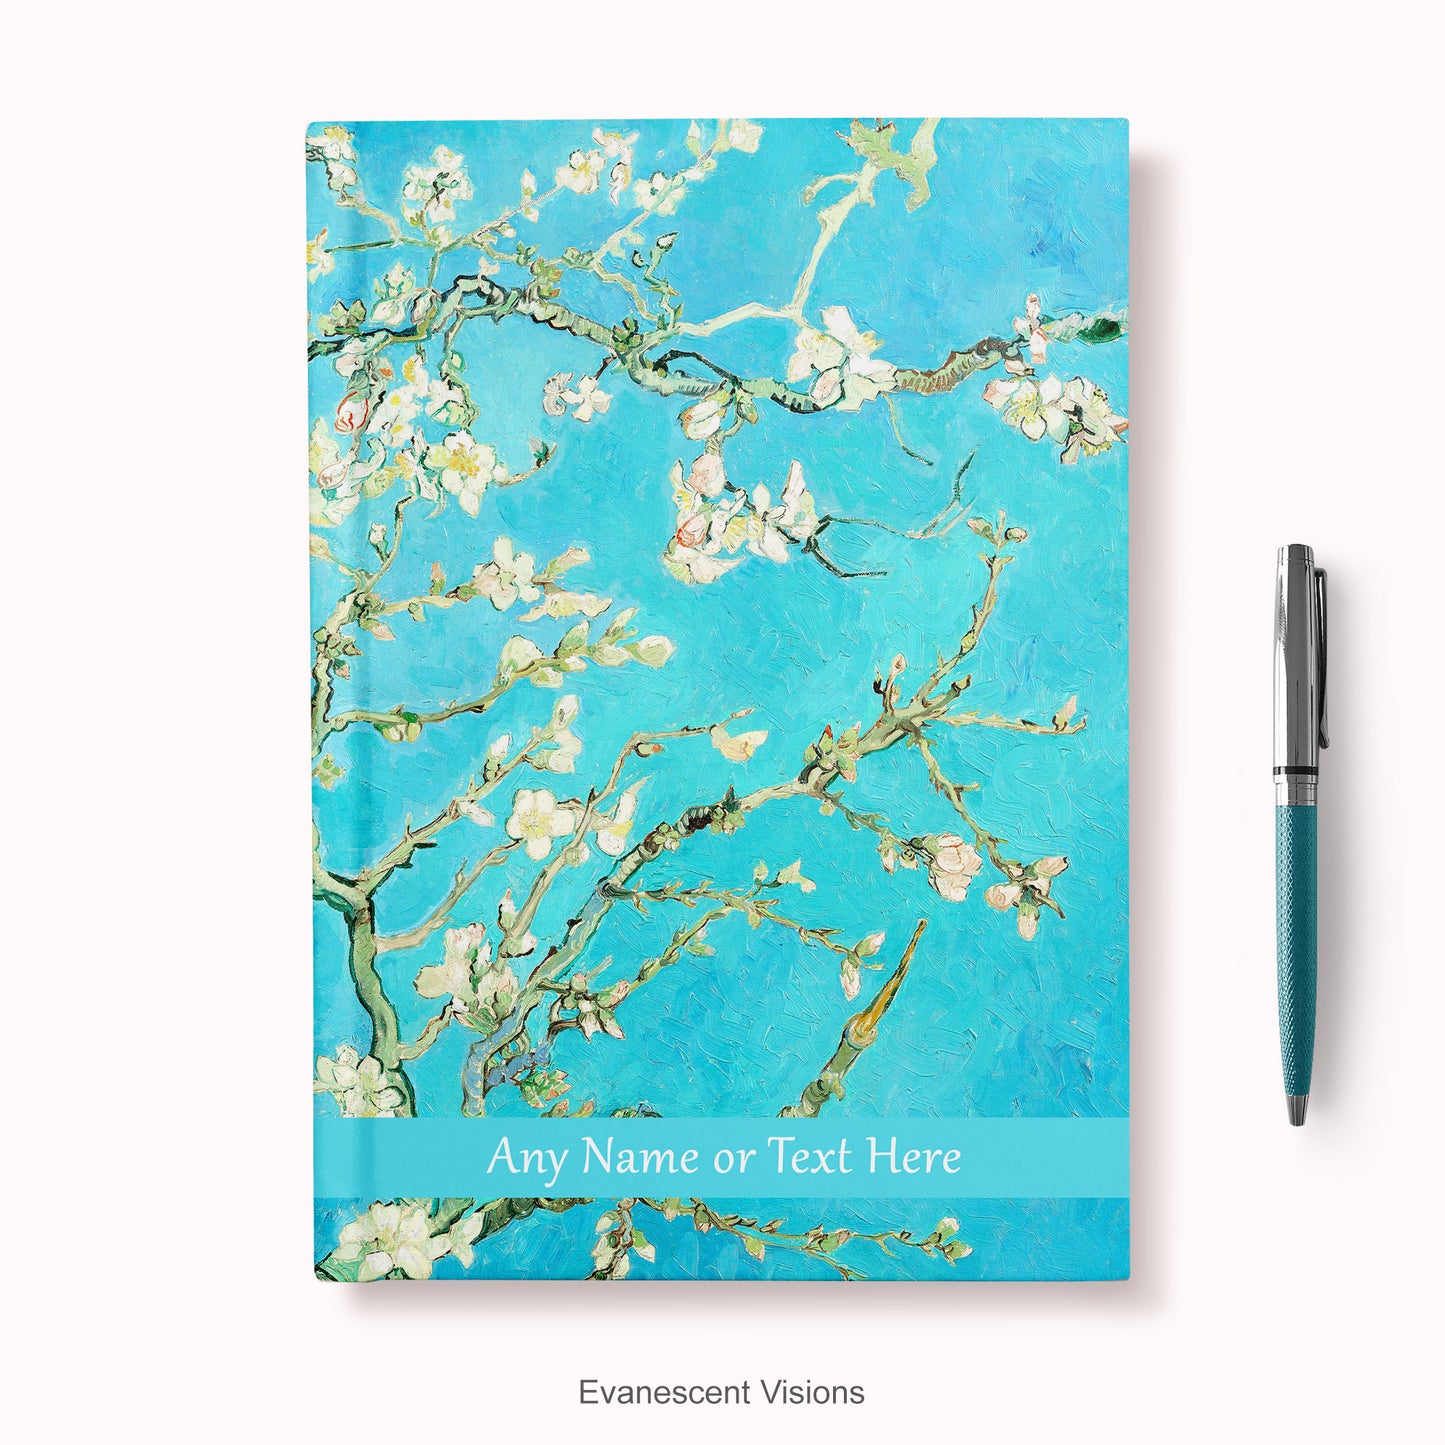 Personalised hardcover notebook, with Van Gogh's Almond Blossom